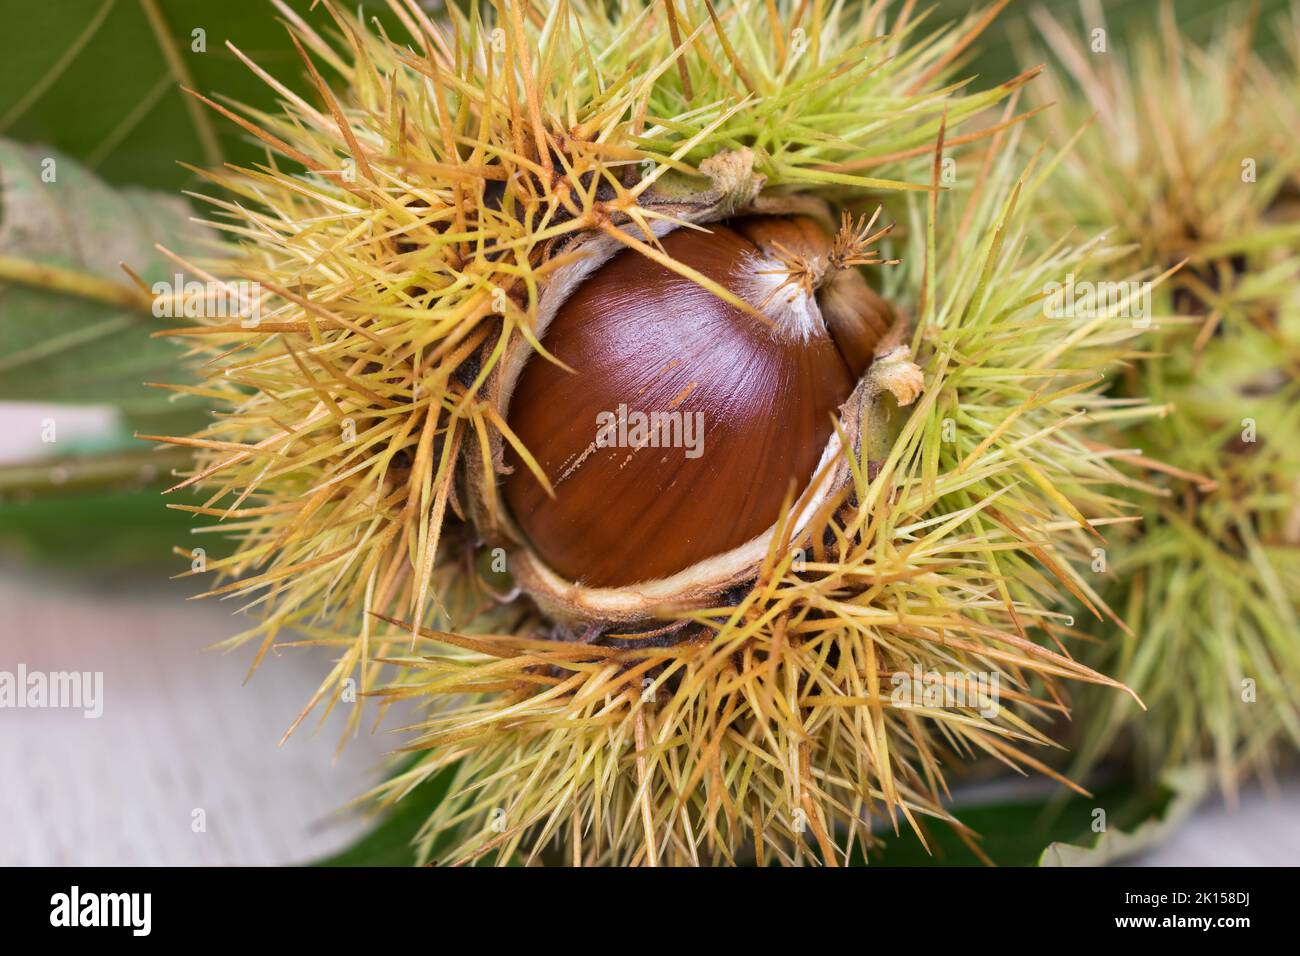 close-up chestnuts inside the hedgehog Stock Photo